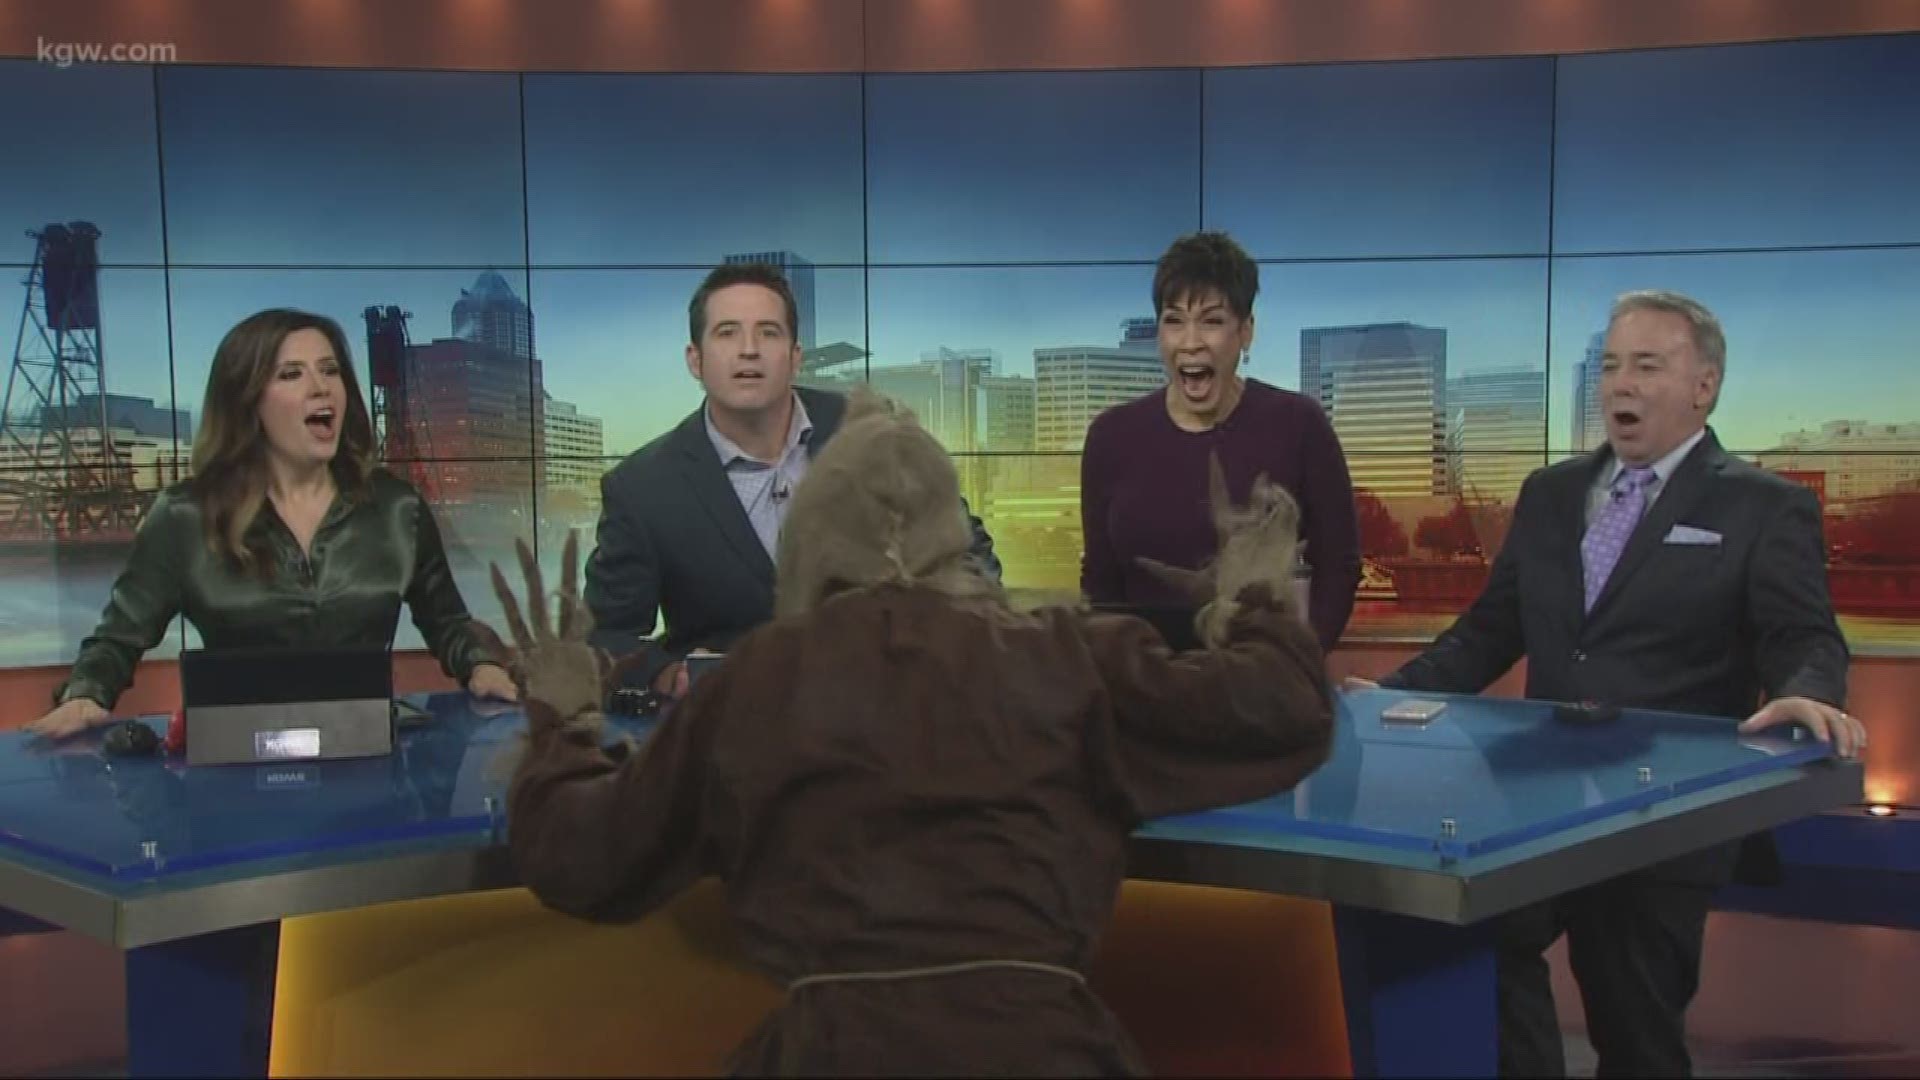 The KGW Sunrise Crew got quite the scare on Halloween.